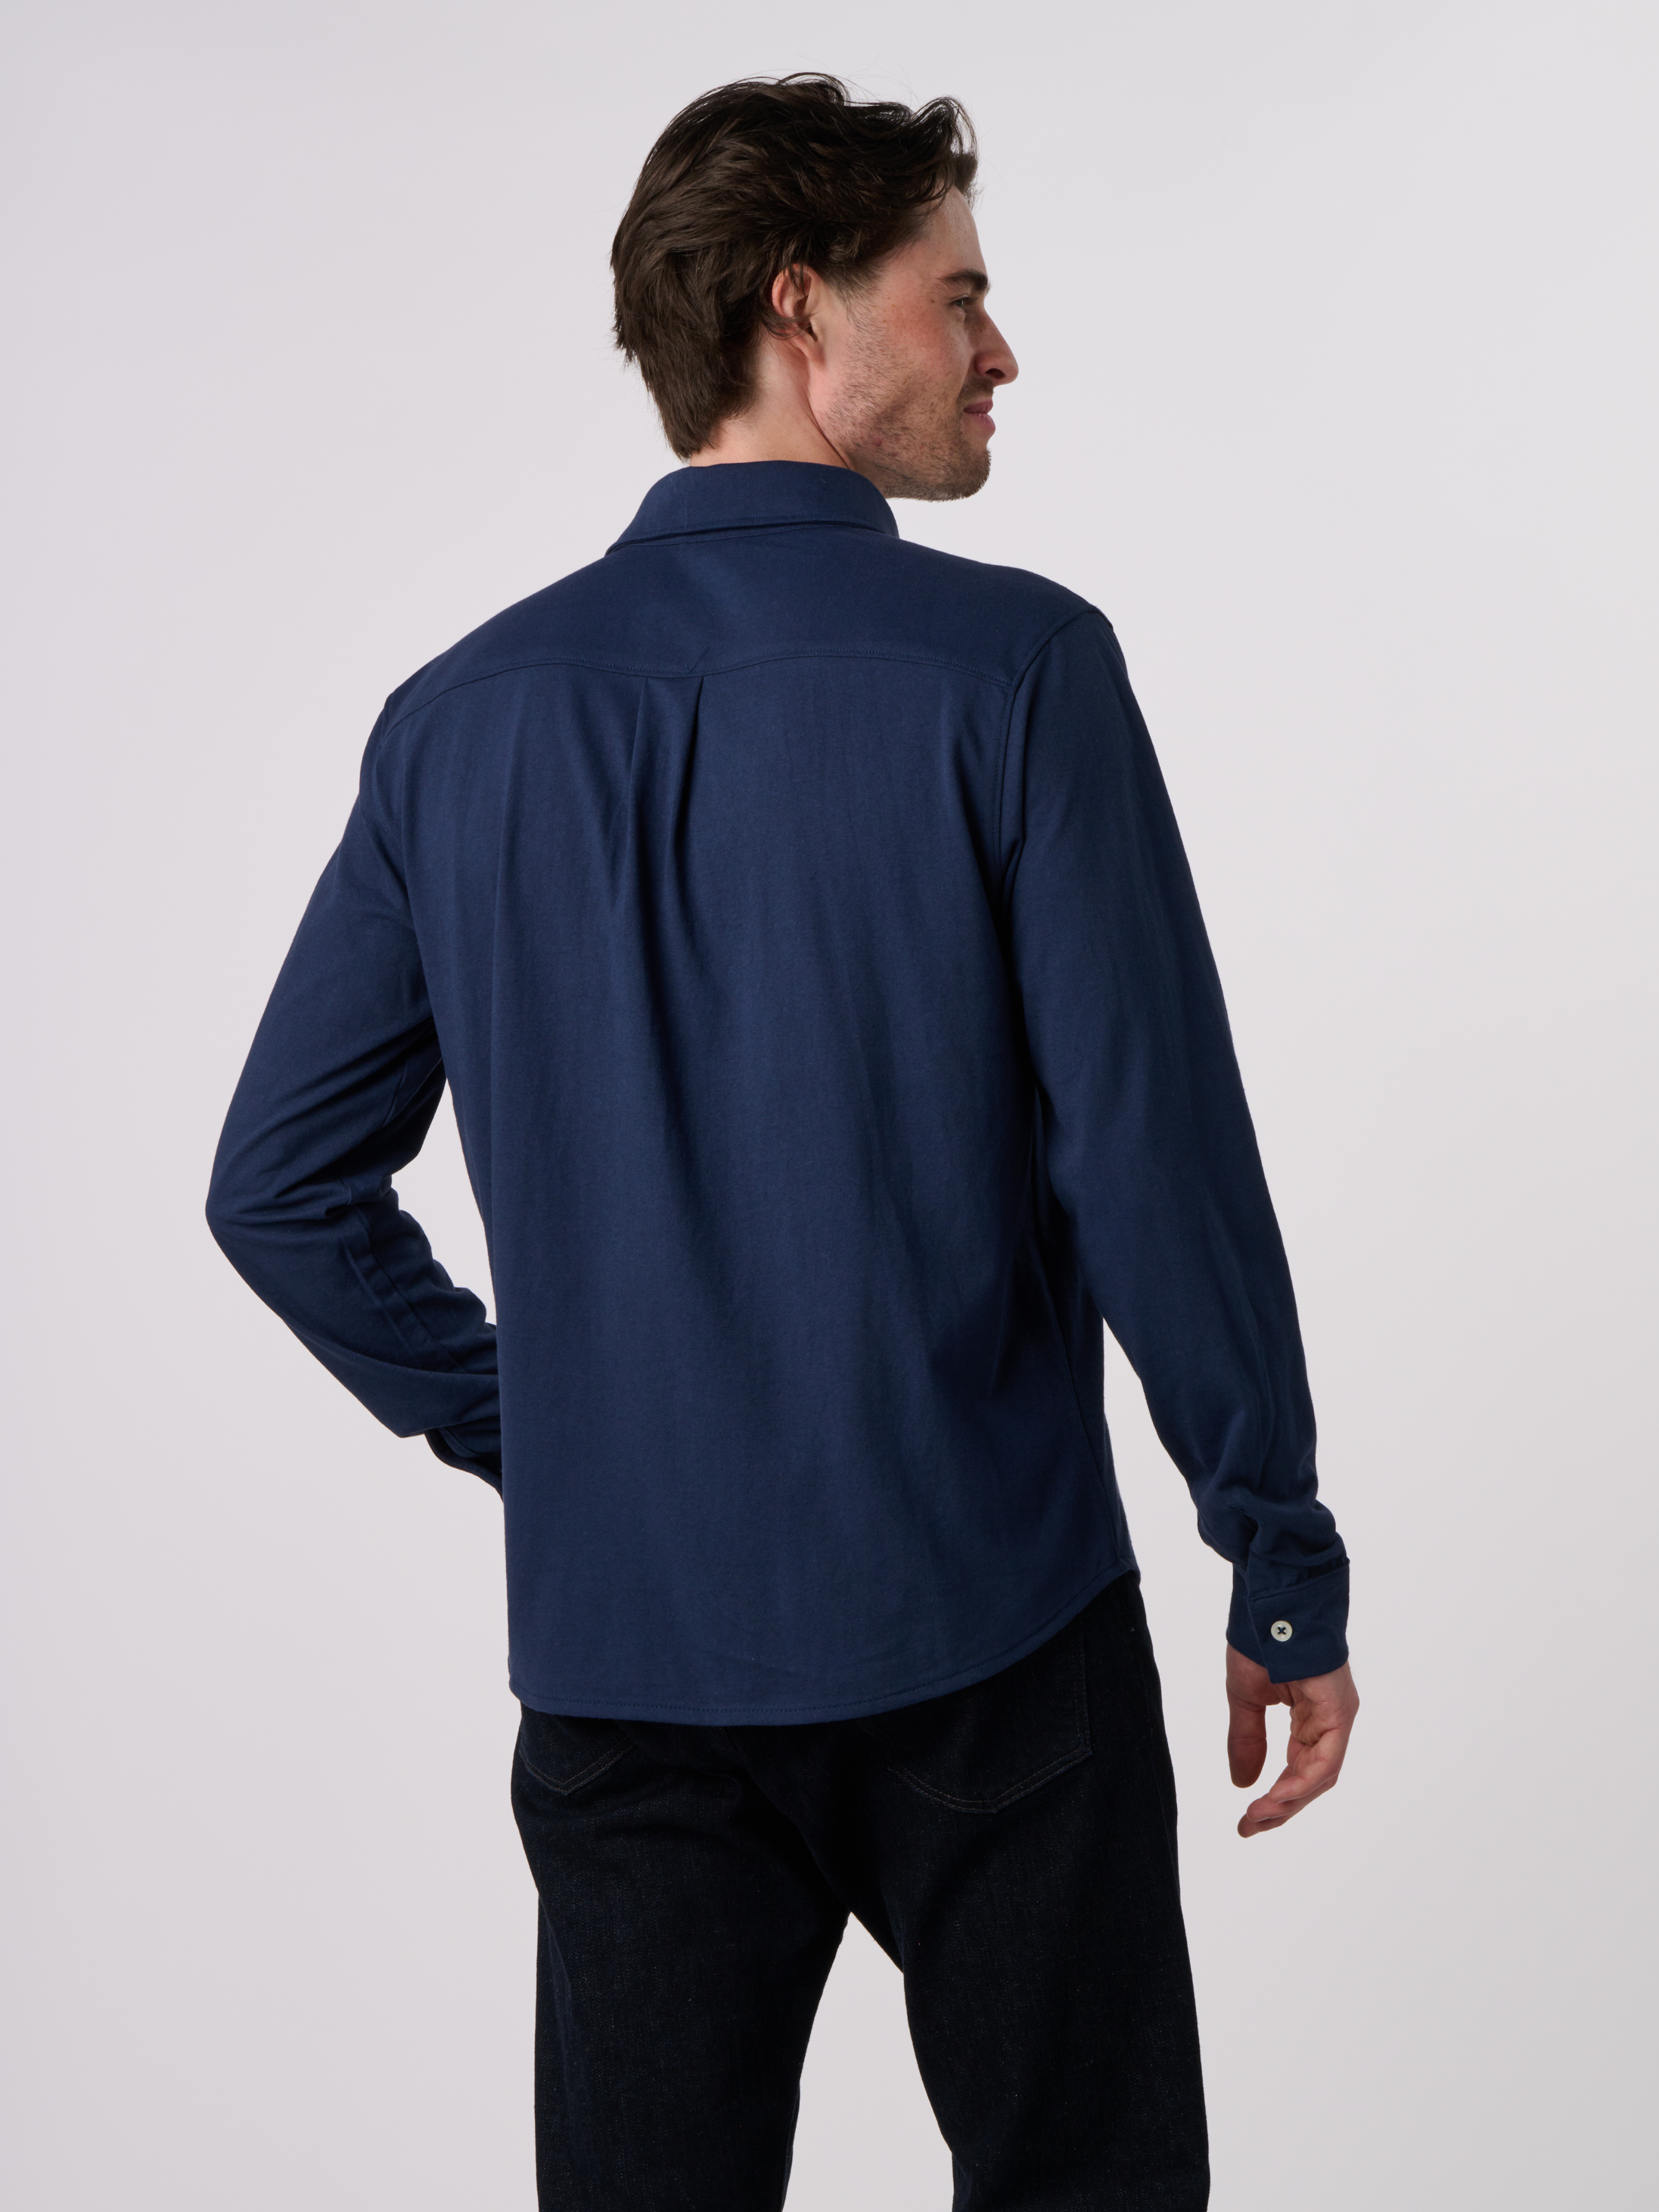 RECOVER_EC650_ECOBUTTONDOWN_NAVY_BACK.png